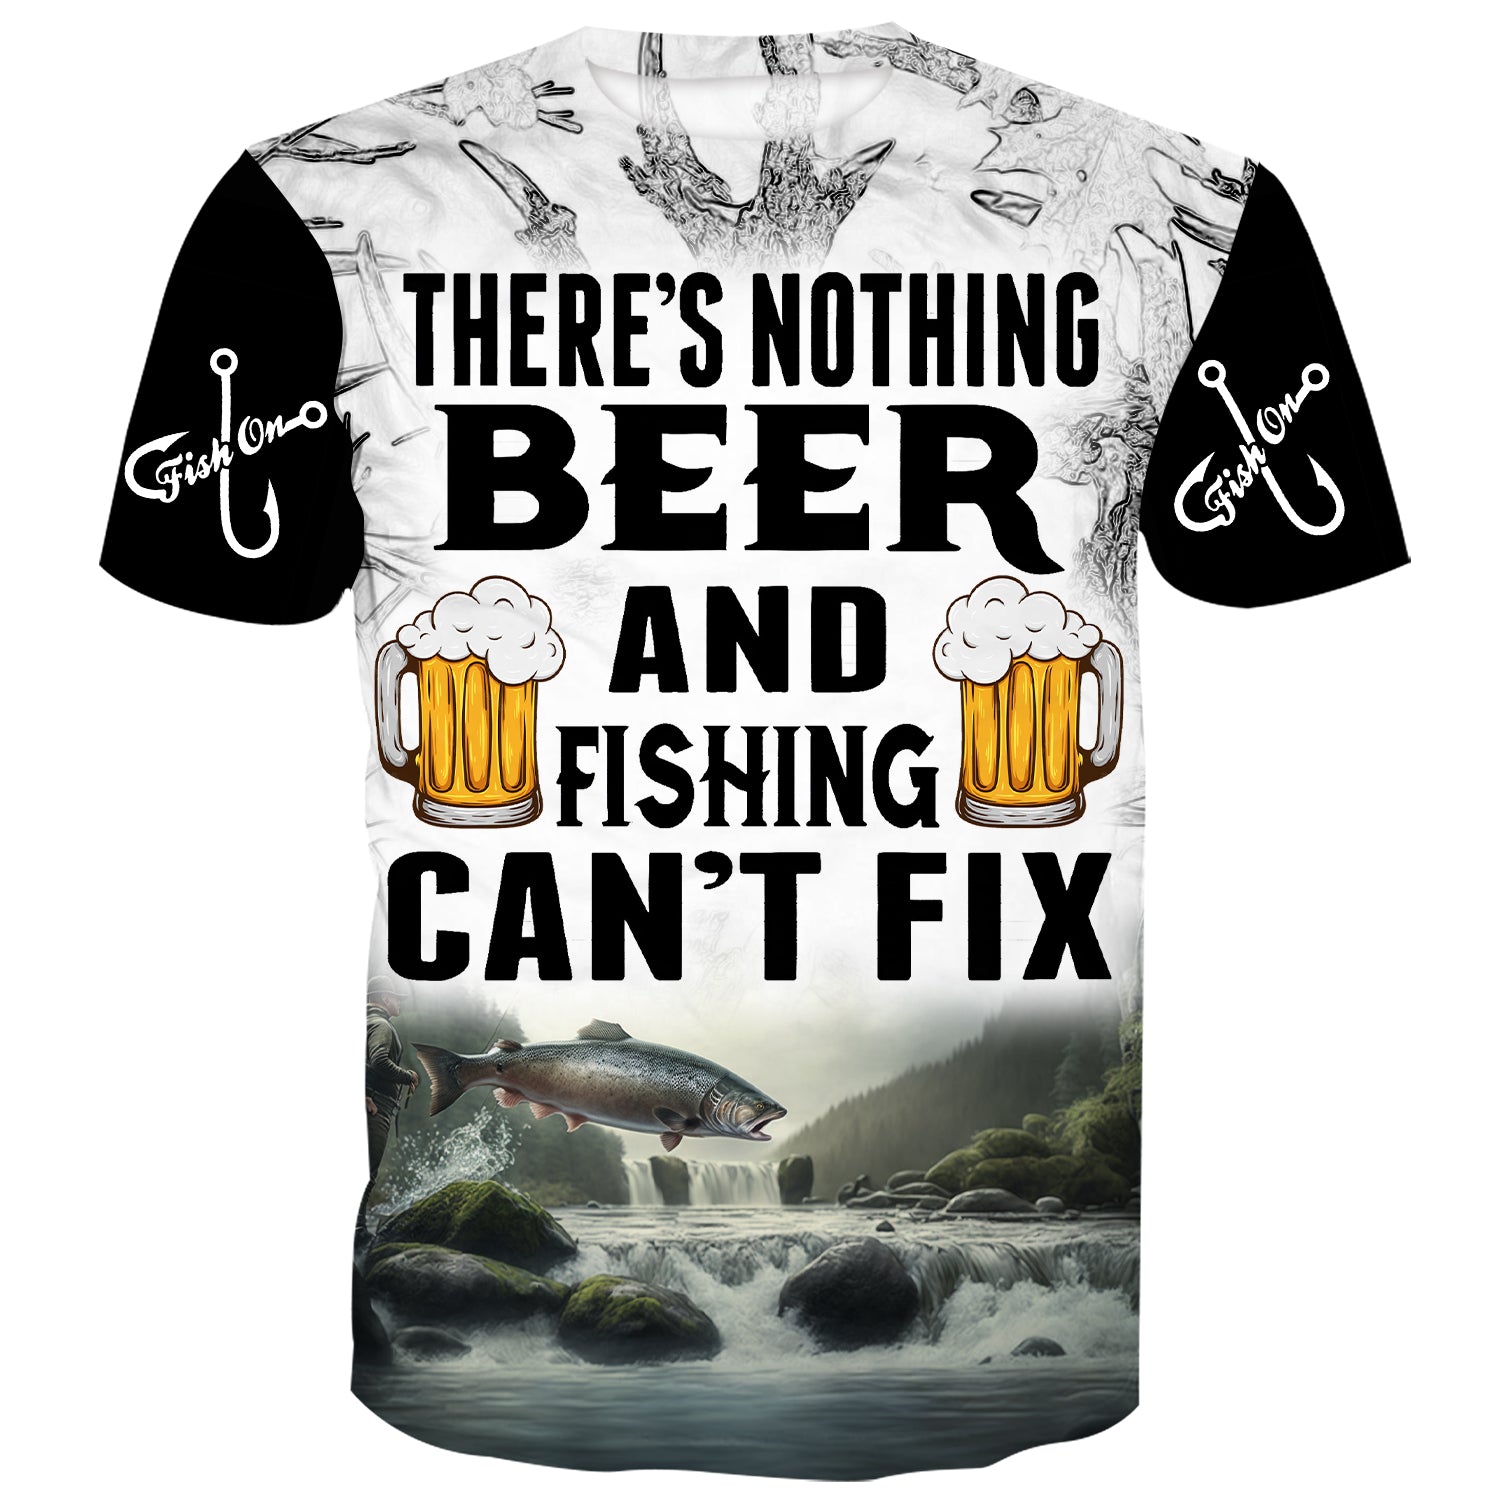 There's nothing beer and fishing can't fix - Salmon Fishing T-Shirt